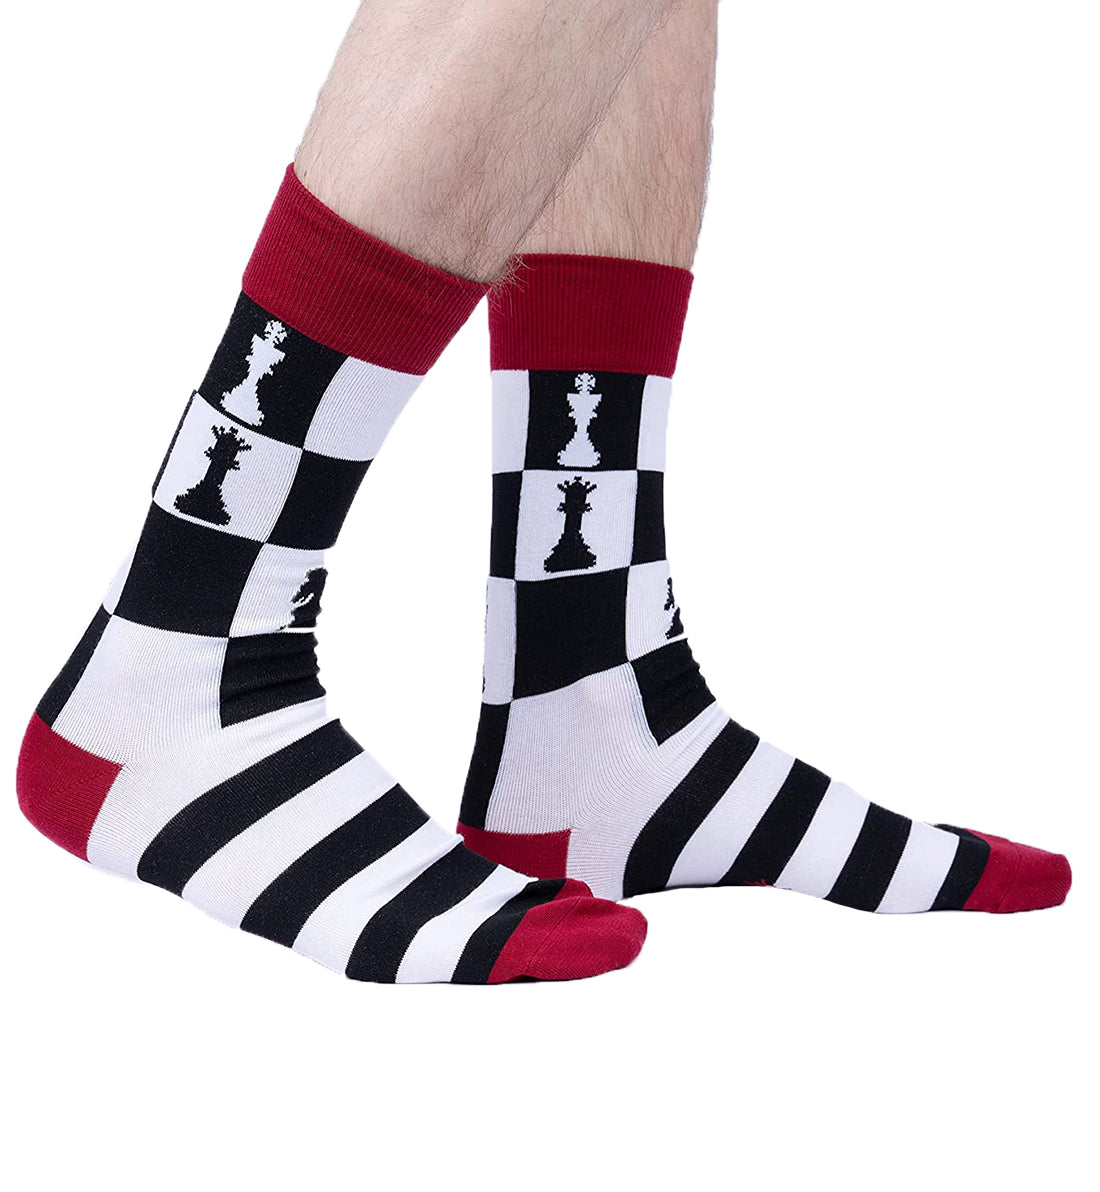 SOCK it to me Men's Crew Socks (MEF0597),Check Yeah - Check Yeah,One Size